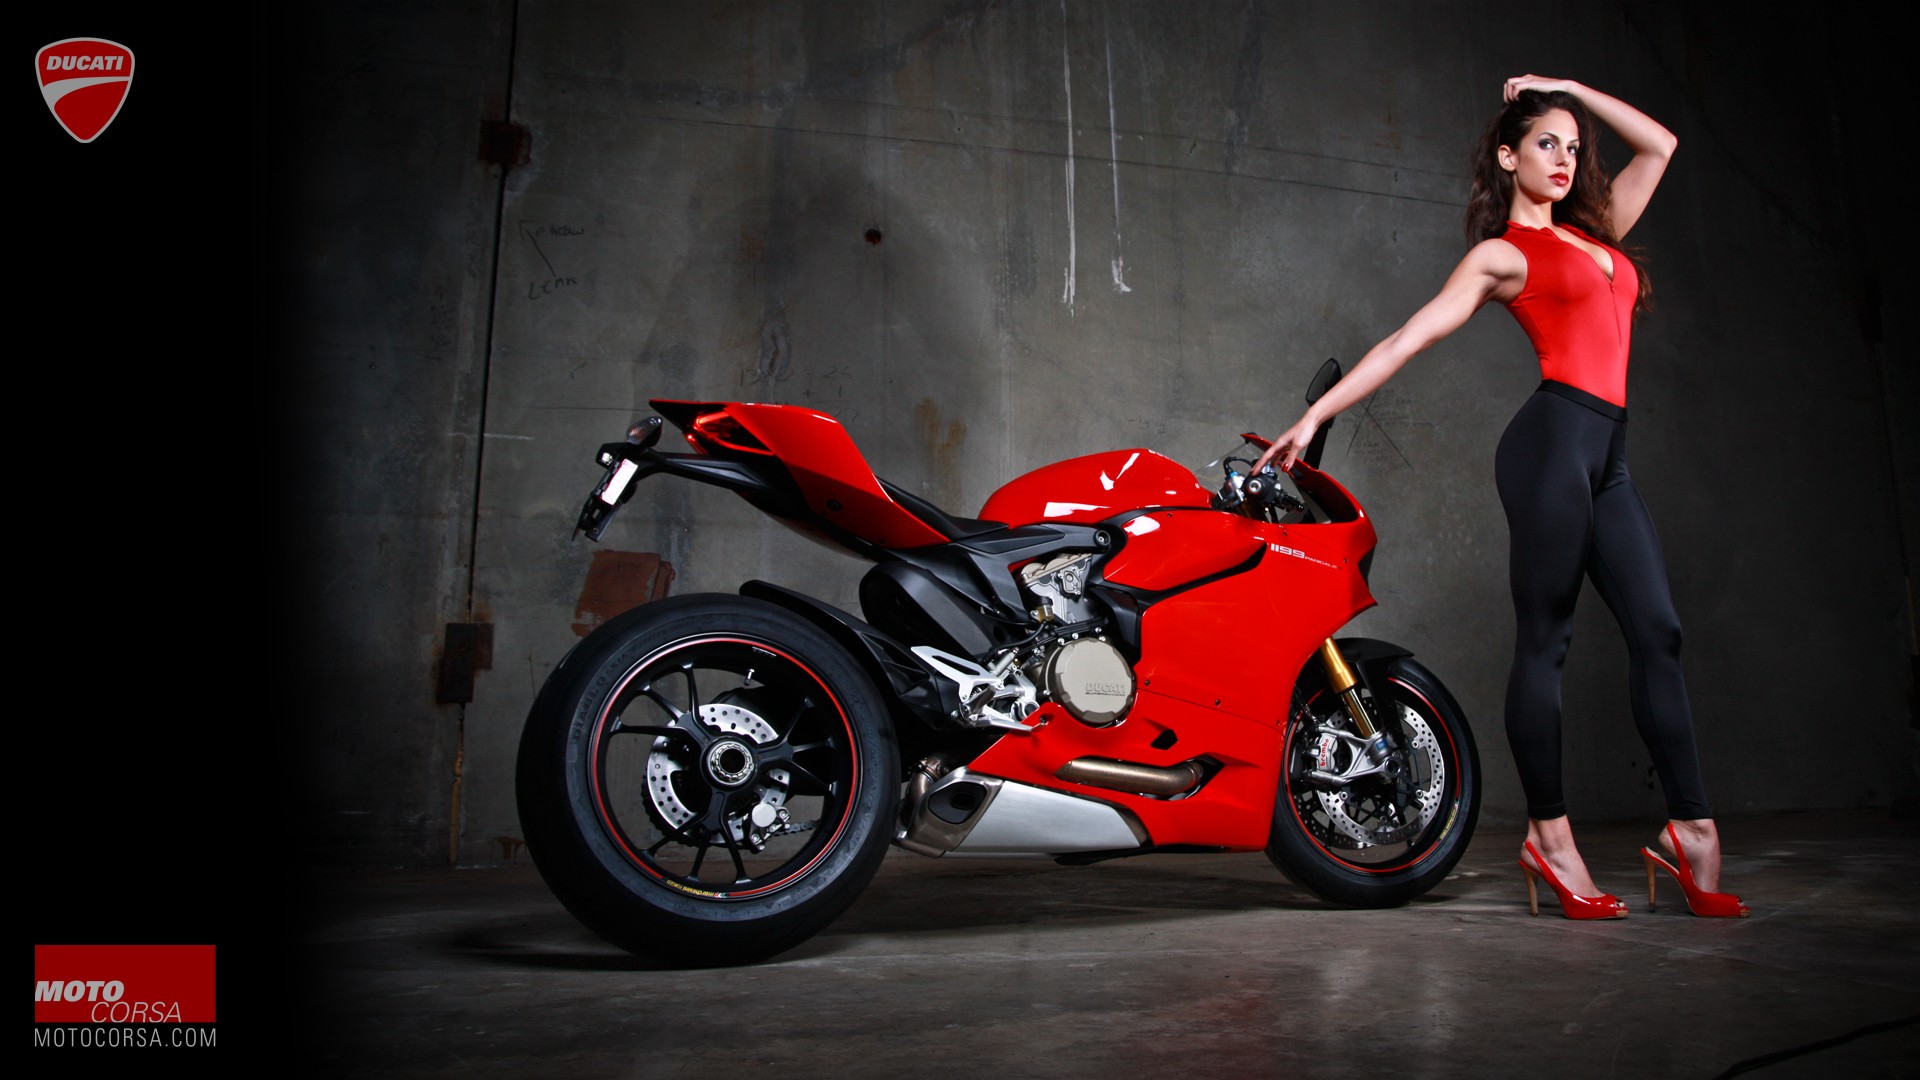 hands On Head, Women With Bikes, Ducati 1199, Motorcycle ...